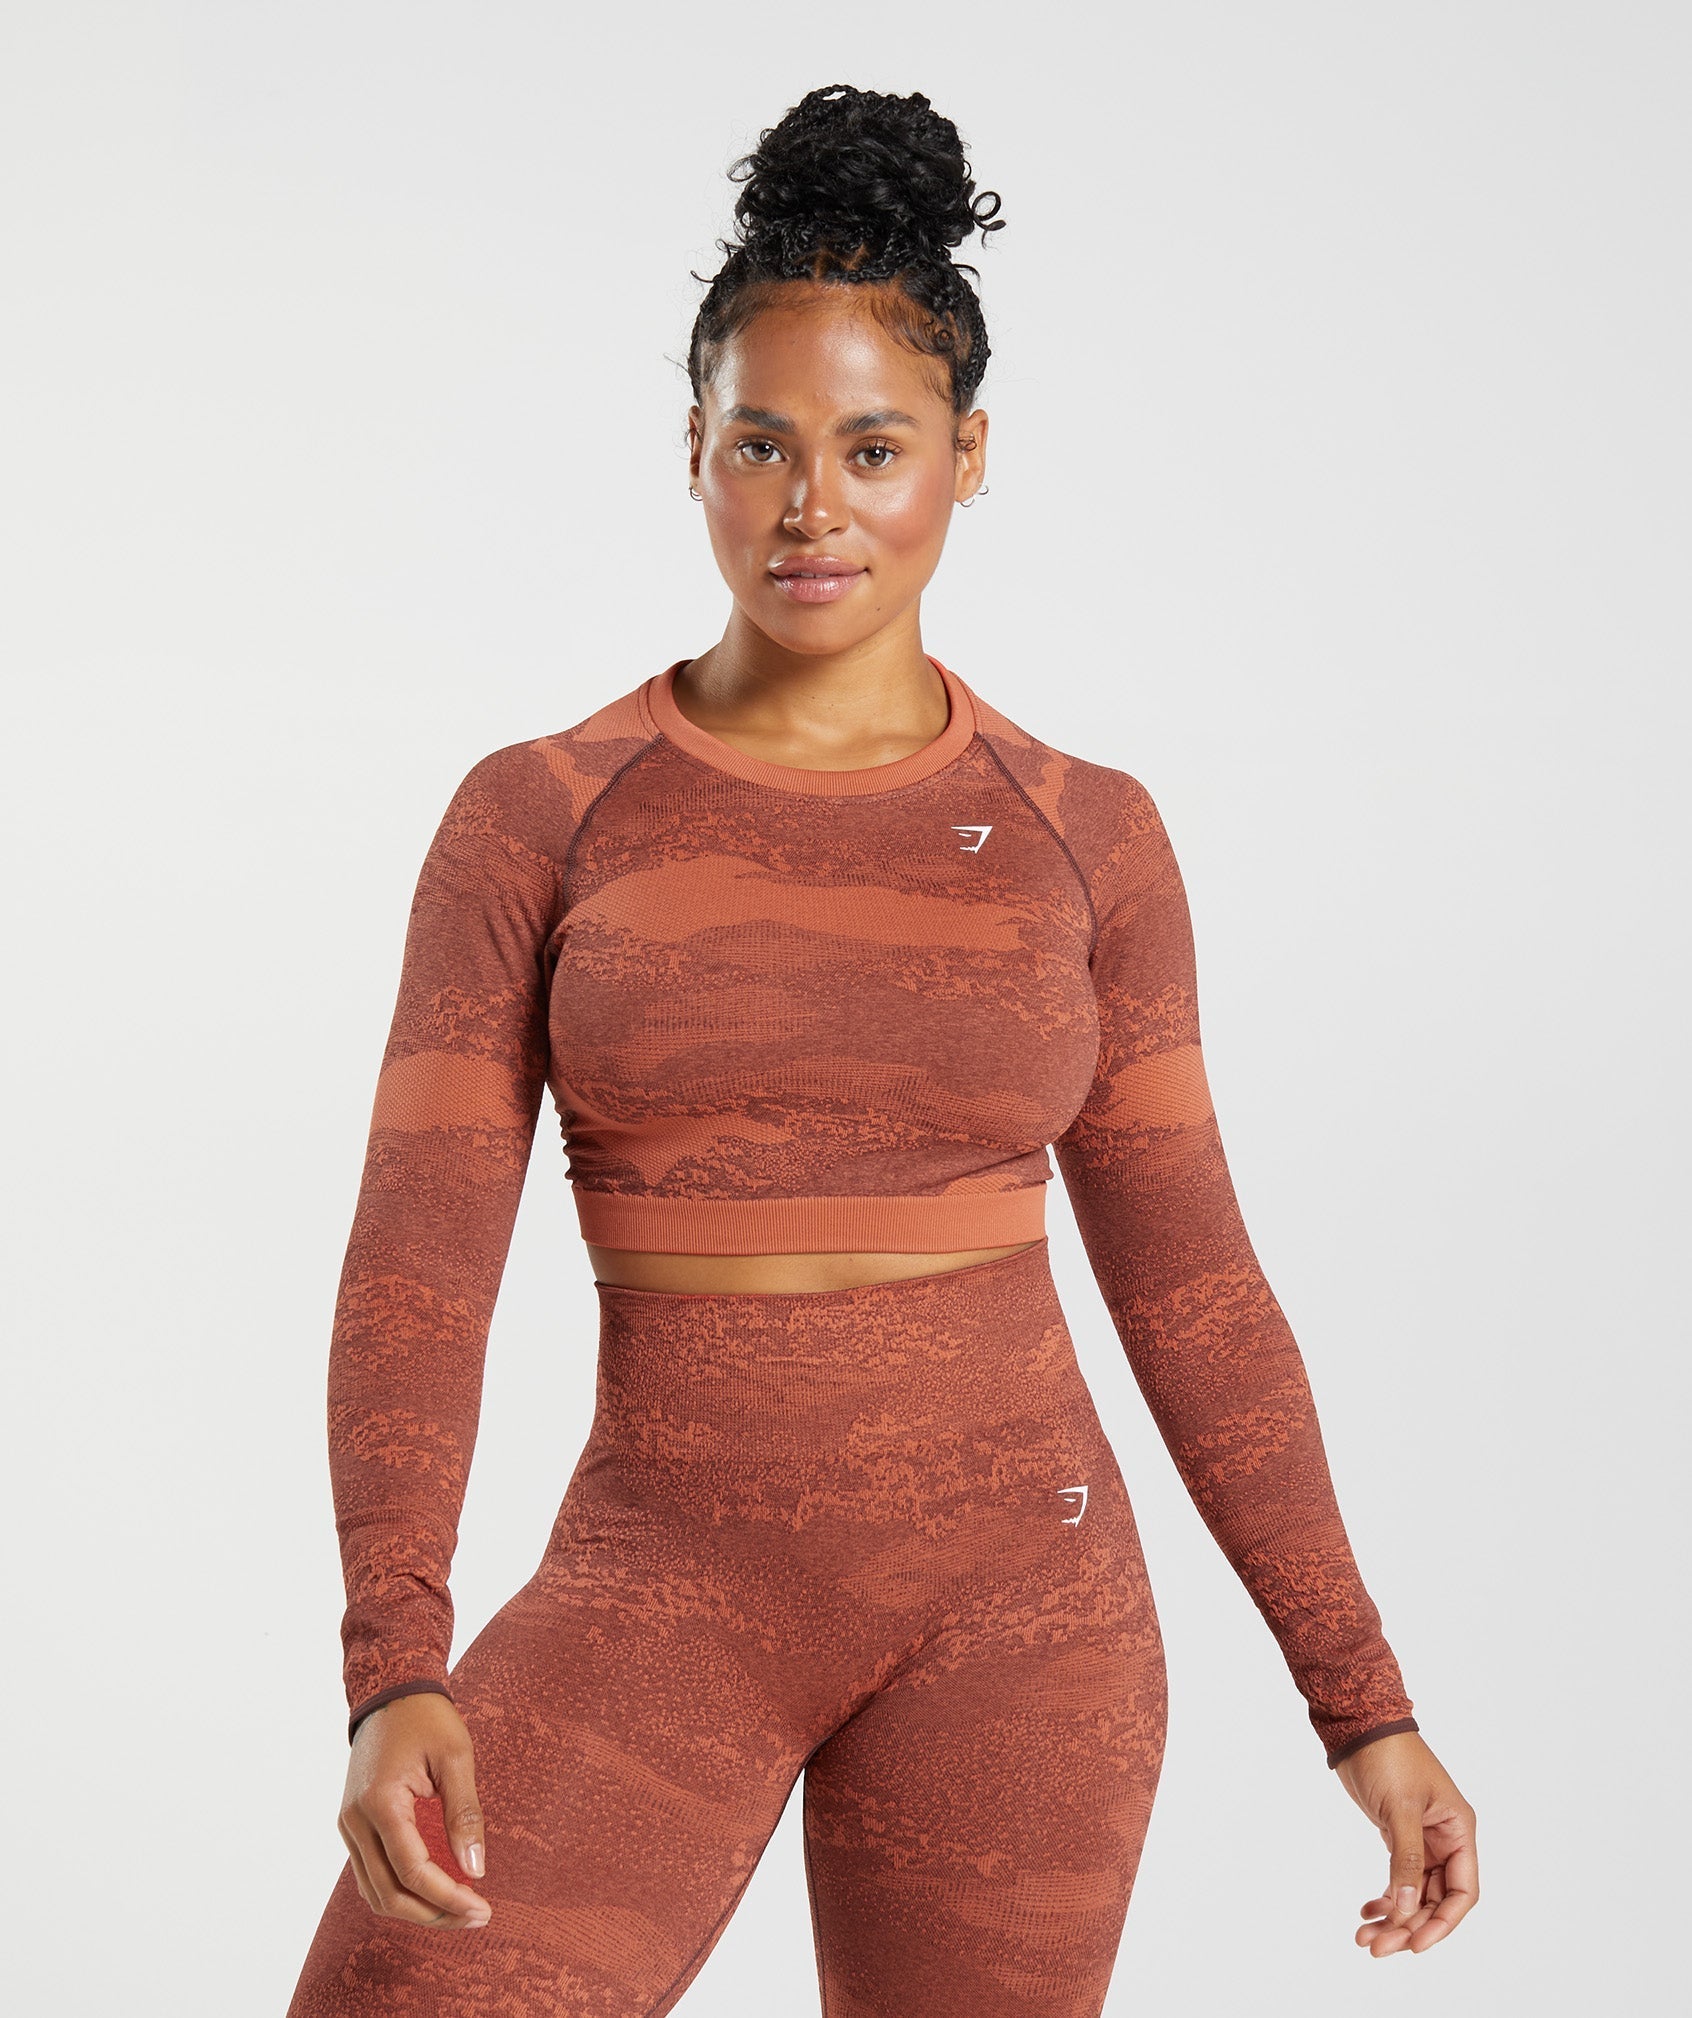 Adapt Camo Seamless Lace Up Back Top in Storm Red/Cherry Brown